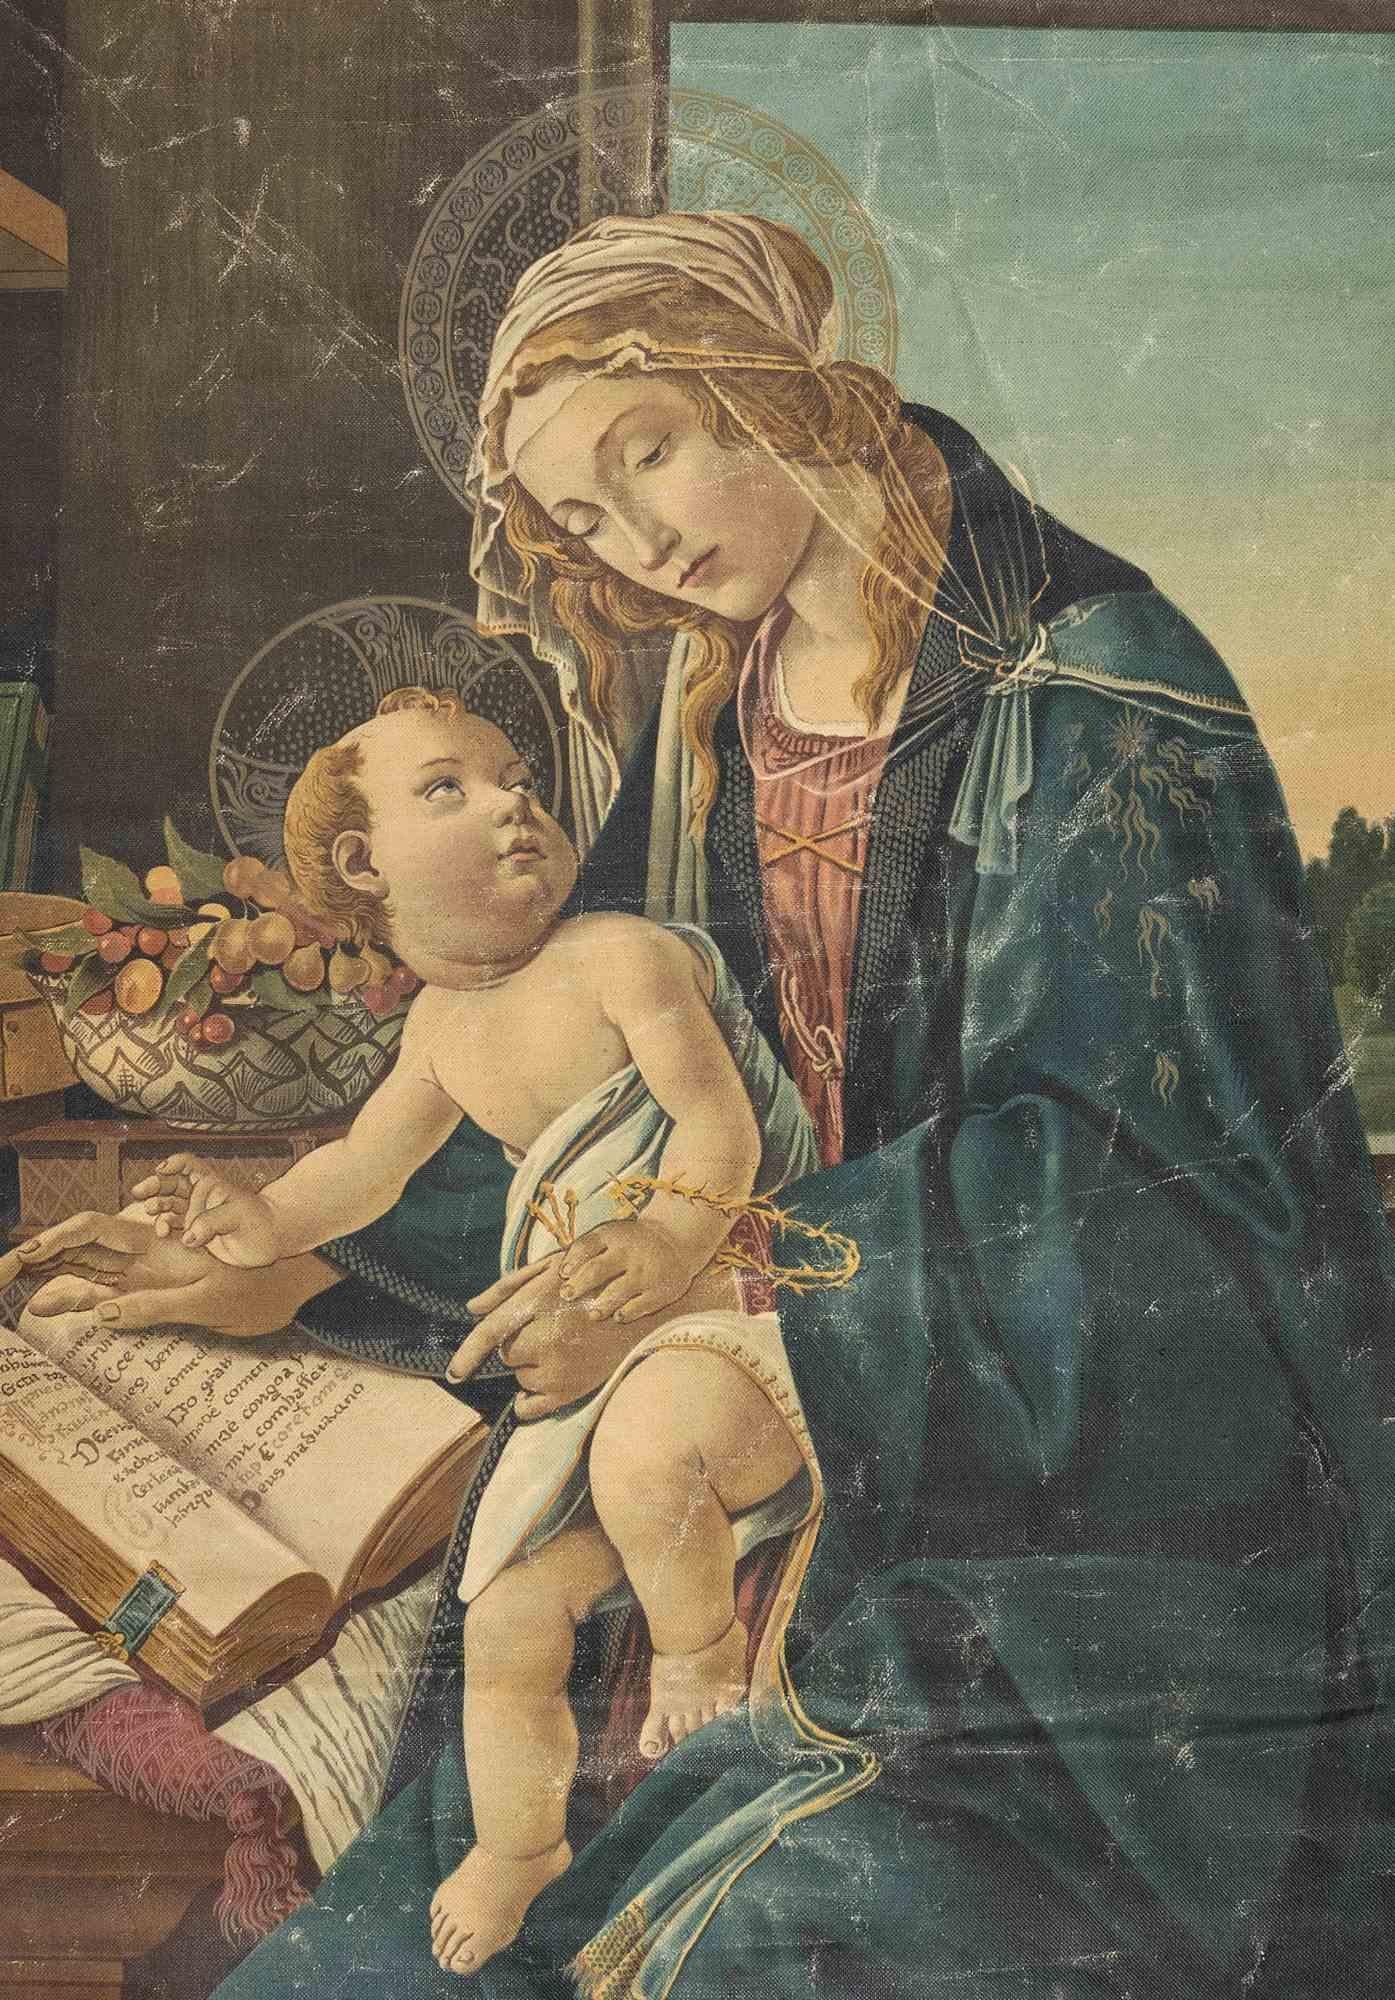 Virgin Mary with Child is a reproduction of Madonna del Libro, Sandro Botticelli, realized in Italy in 1940s. 

Border and fringe in fabric.

Brass standard holder.

98x71 cm - 97x73 only standard.

Good conditions except for some small loss